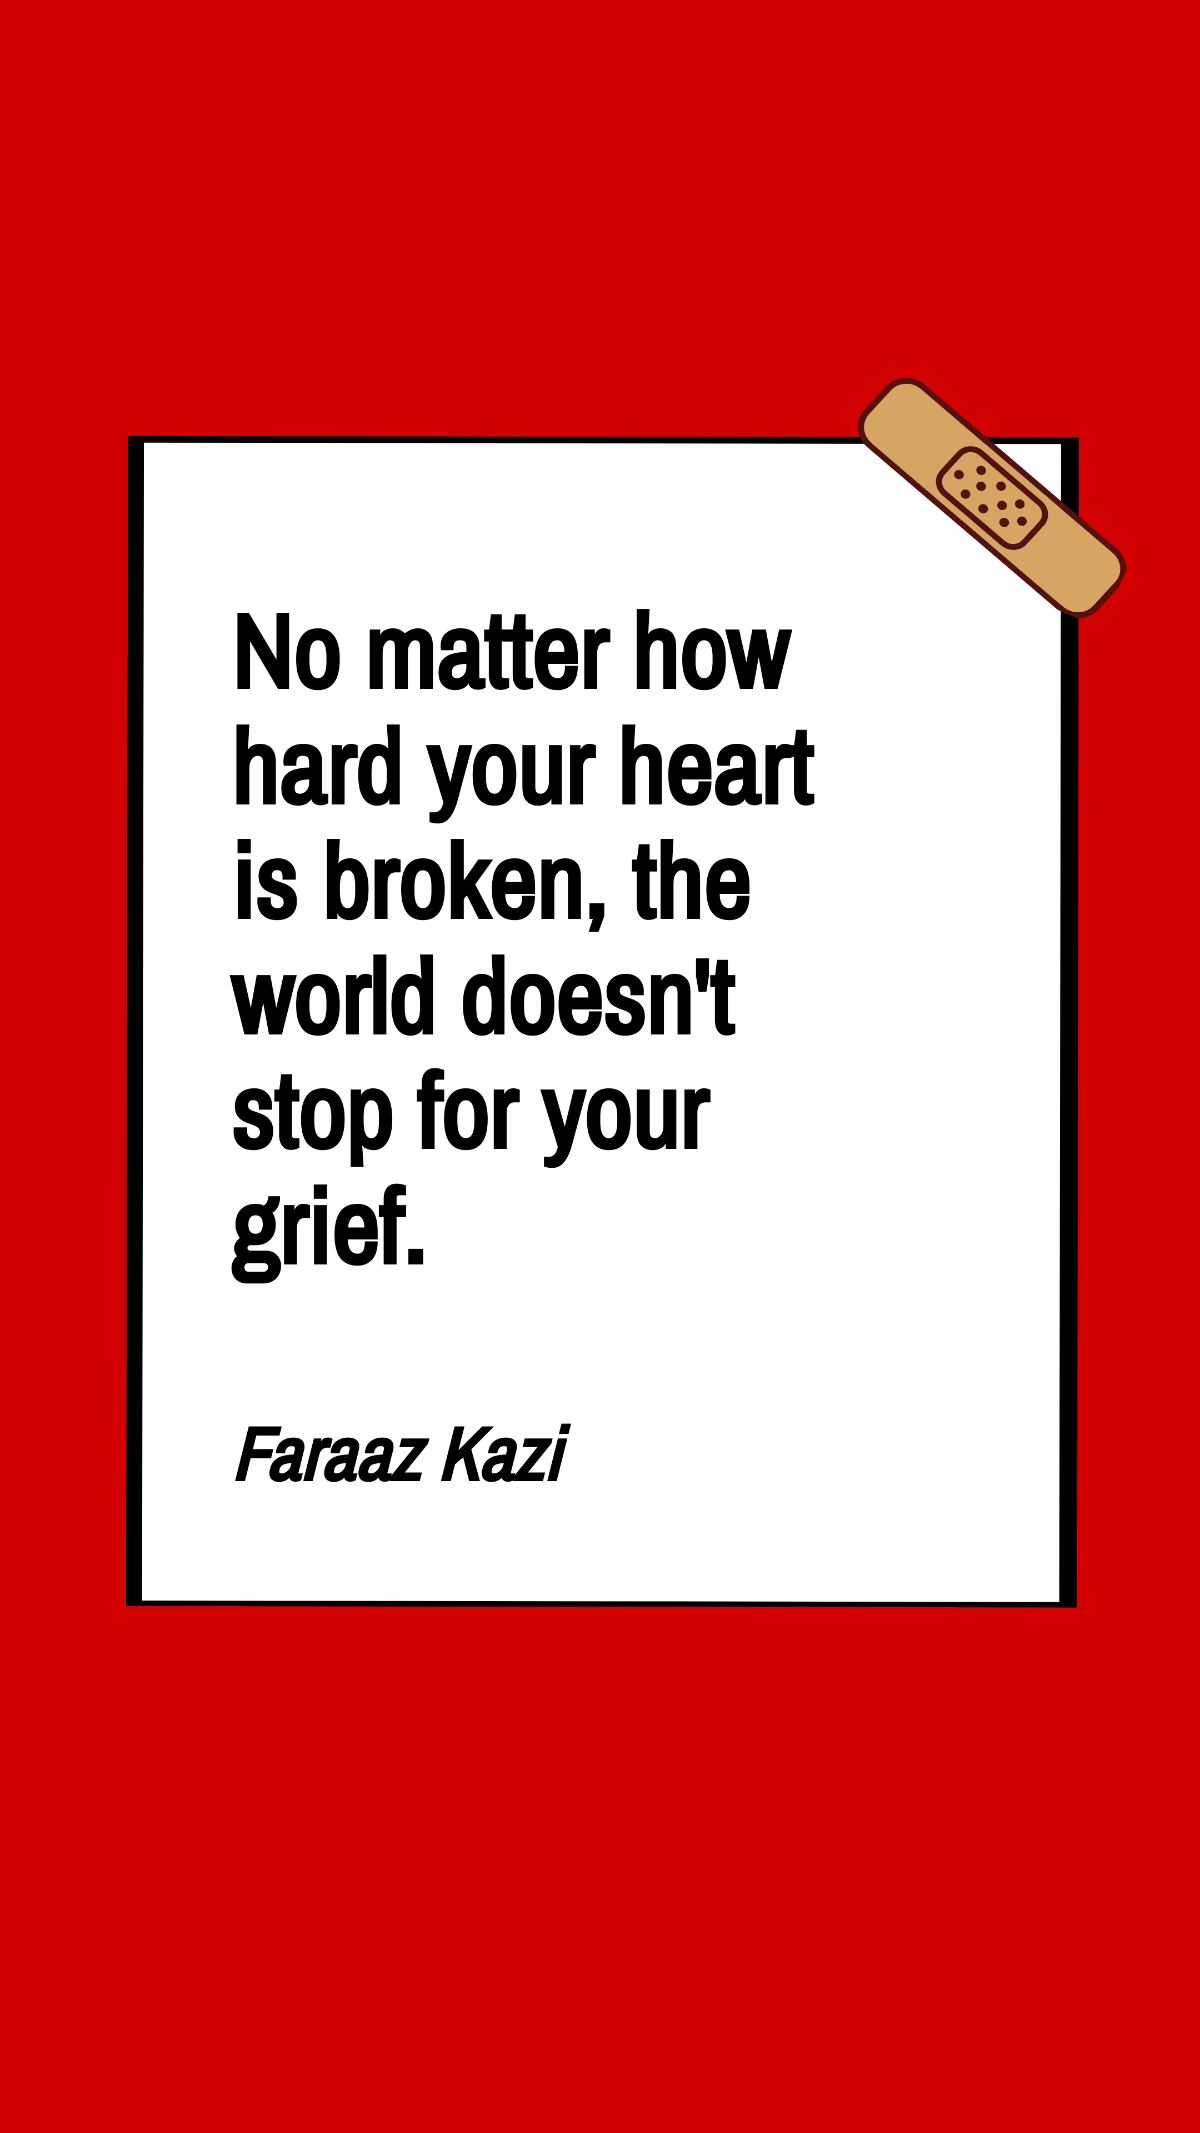 Free Faraaz Kazi - No matter how hard your heart is broken, the world doesn't stop for your grief. Template